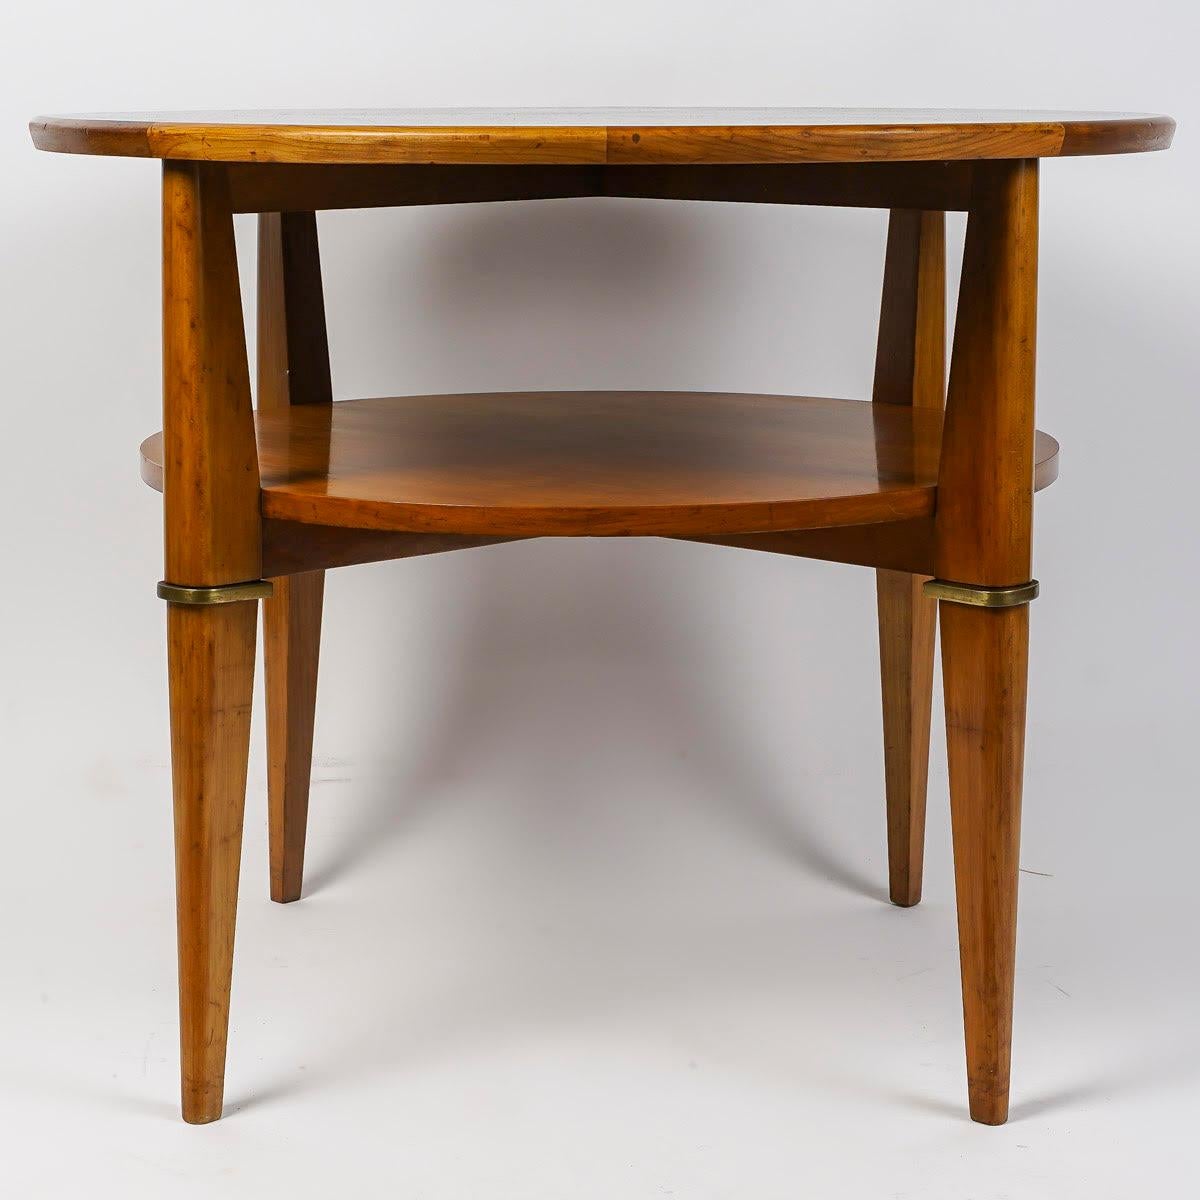 Pedestal table, Modernist period, Year 1940.

Pedestal table from the 1940s, Modernist style, cherry wood, gilt bronze ring, double top.
h: 64cm, d: 80cm